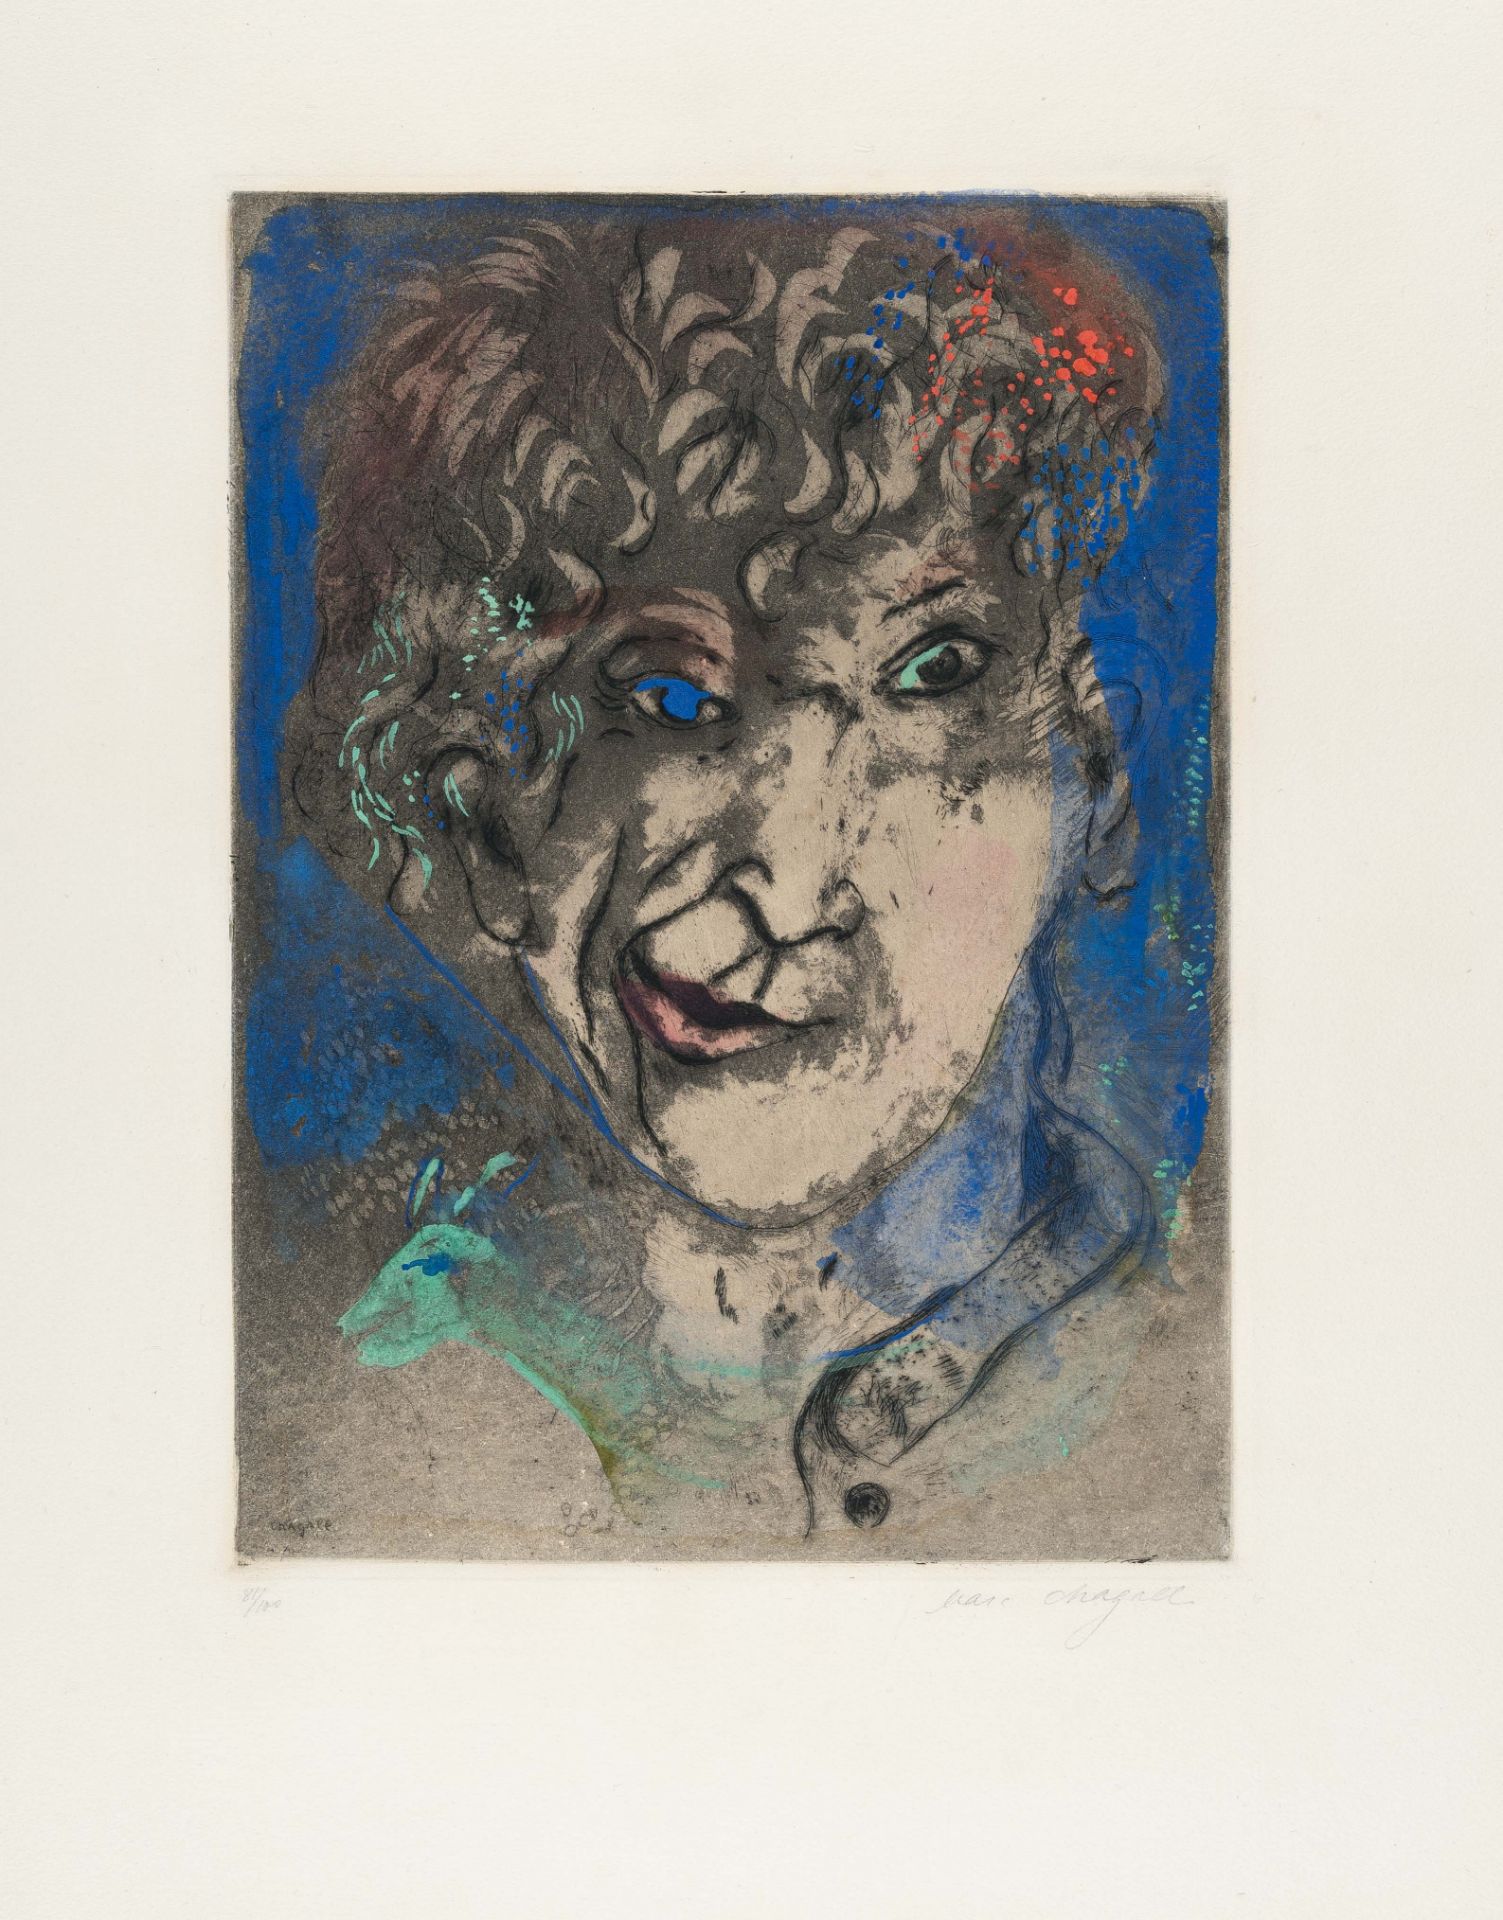 Marc Chagall (1887 Witebsk - Saint-Paul-de-Vence 1985), Self portrait with a grimaceEtching with